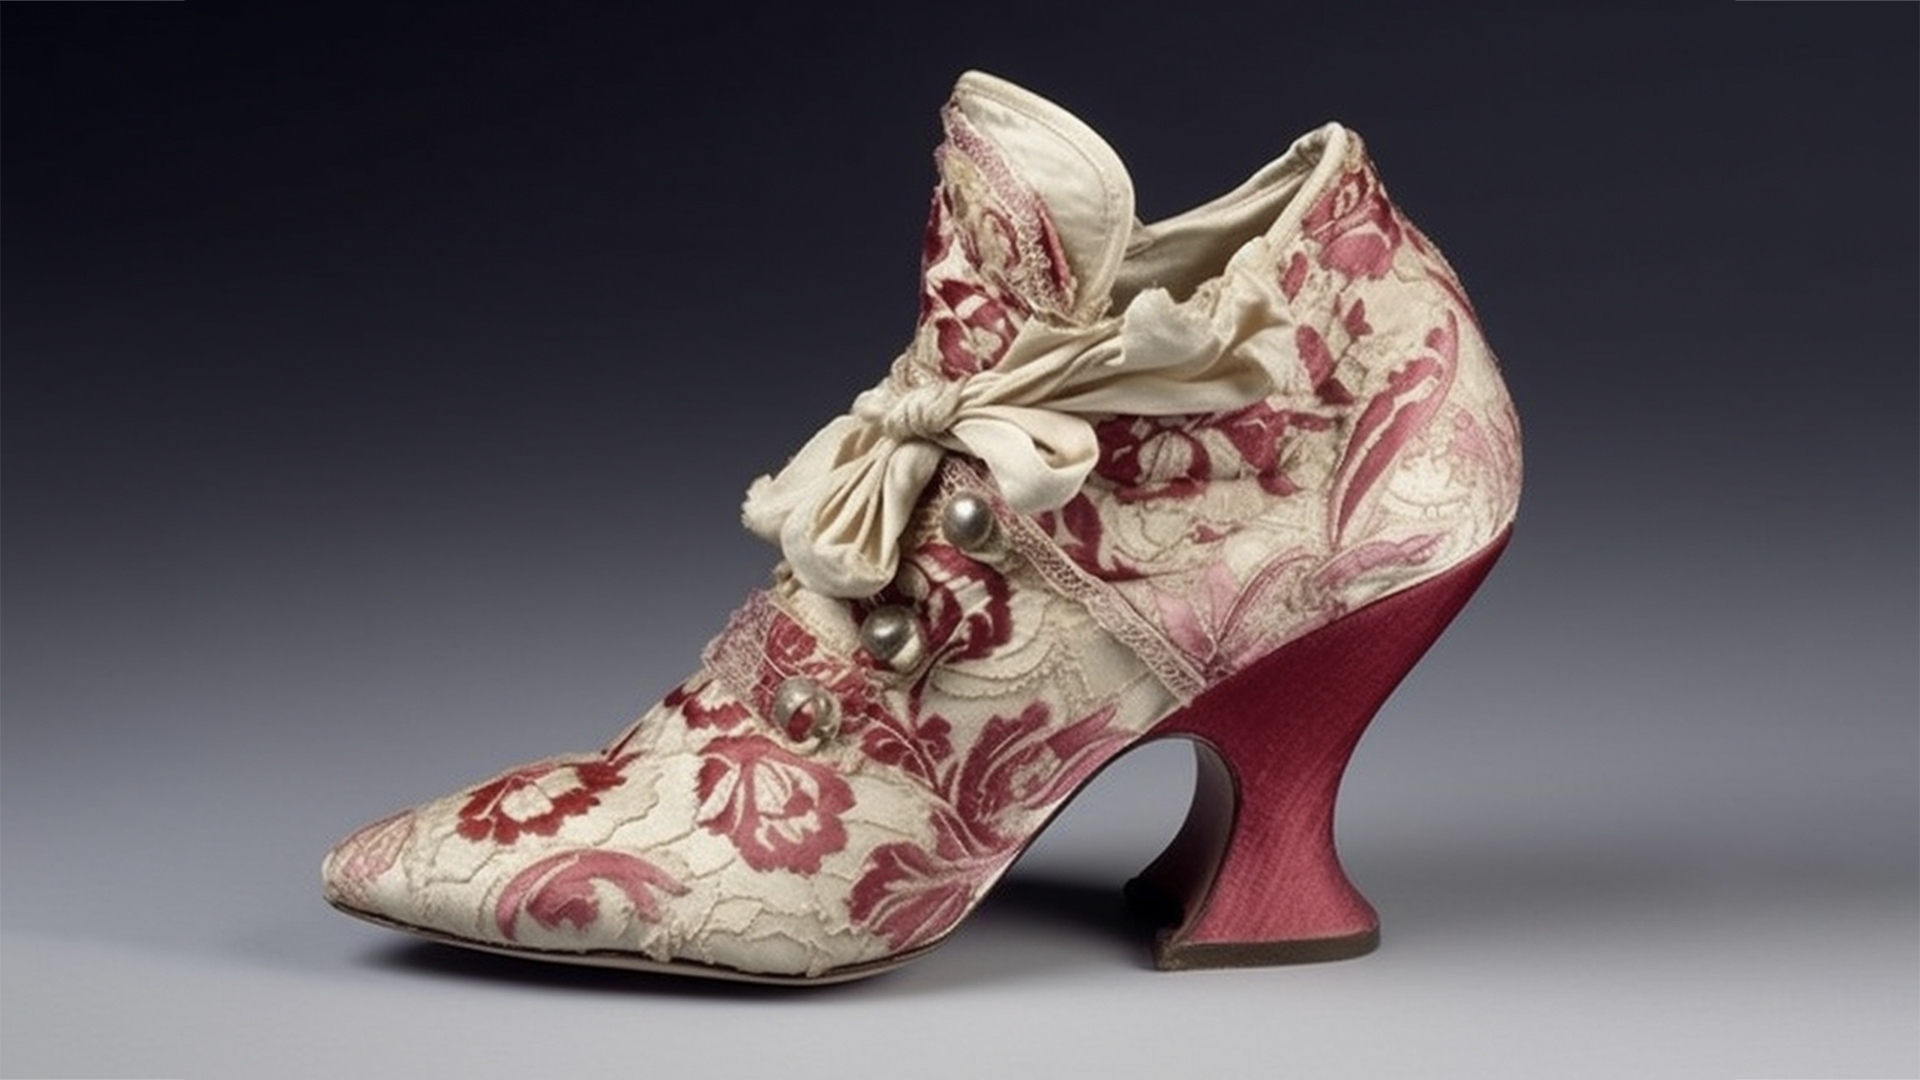 Women's shoes decorated with a painted floral design